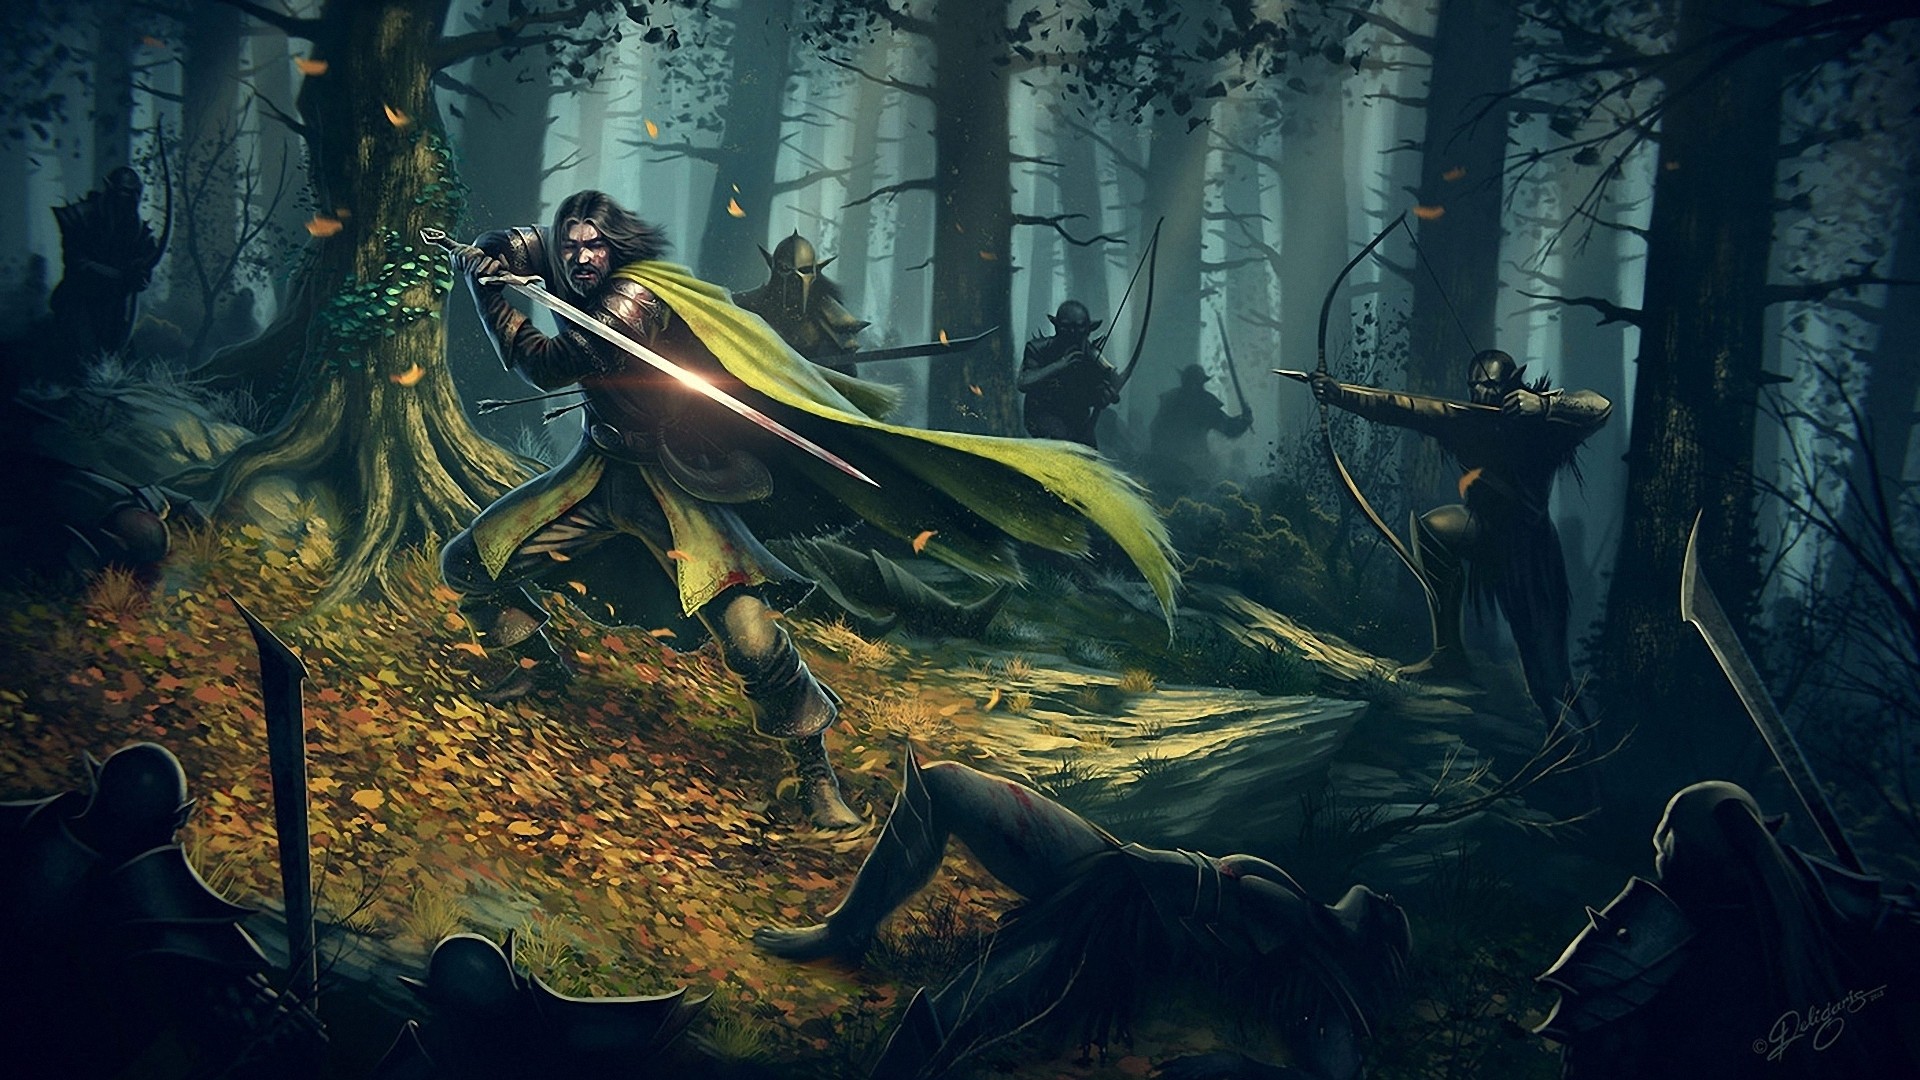 forest, The, Lord, Of, The, Rings, Fantasy, Art, Orcs, Artwork, Warriors, Bow,  weapon , Boromir, The, Warrior, Of, Gondor, Fallen, Leaves Wallpaper